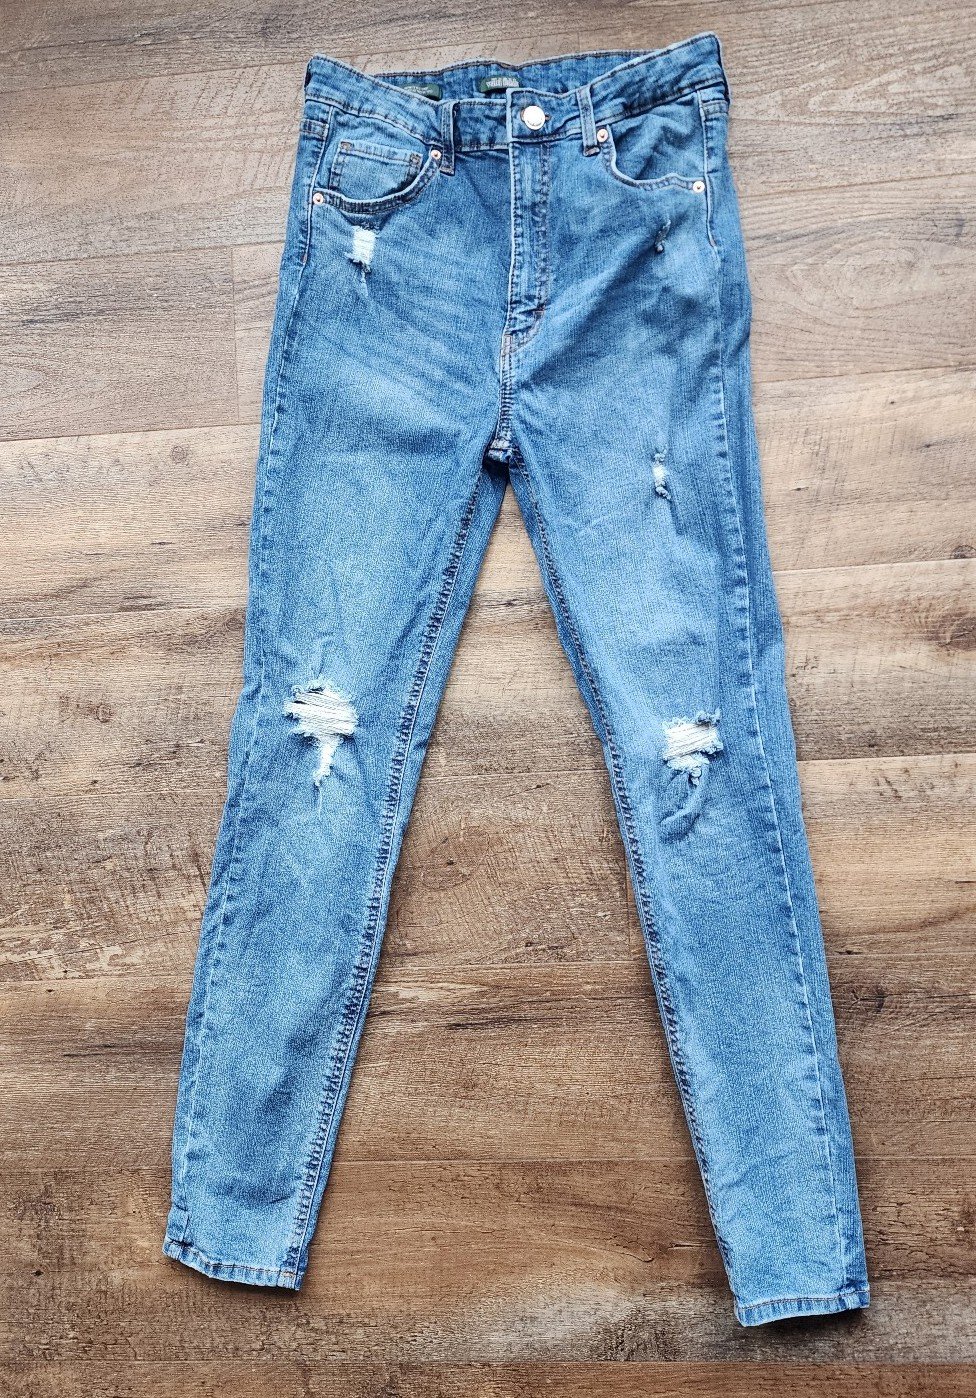 Discounted Wild fable jeans pHCsJzy2O just for you